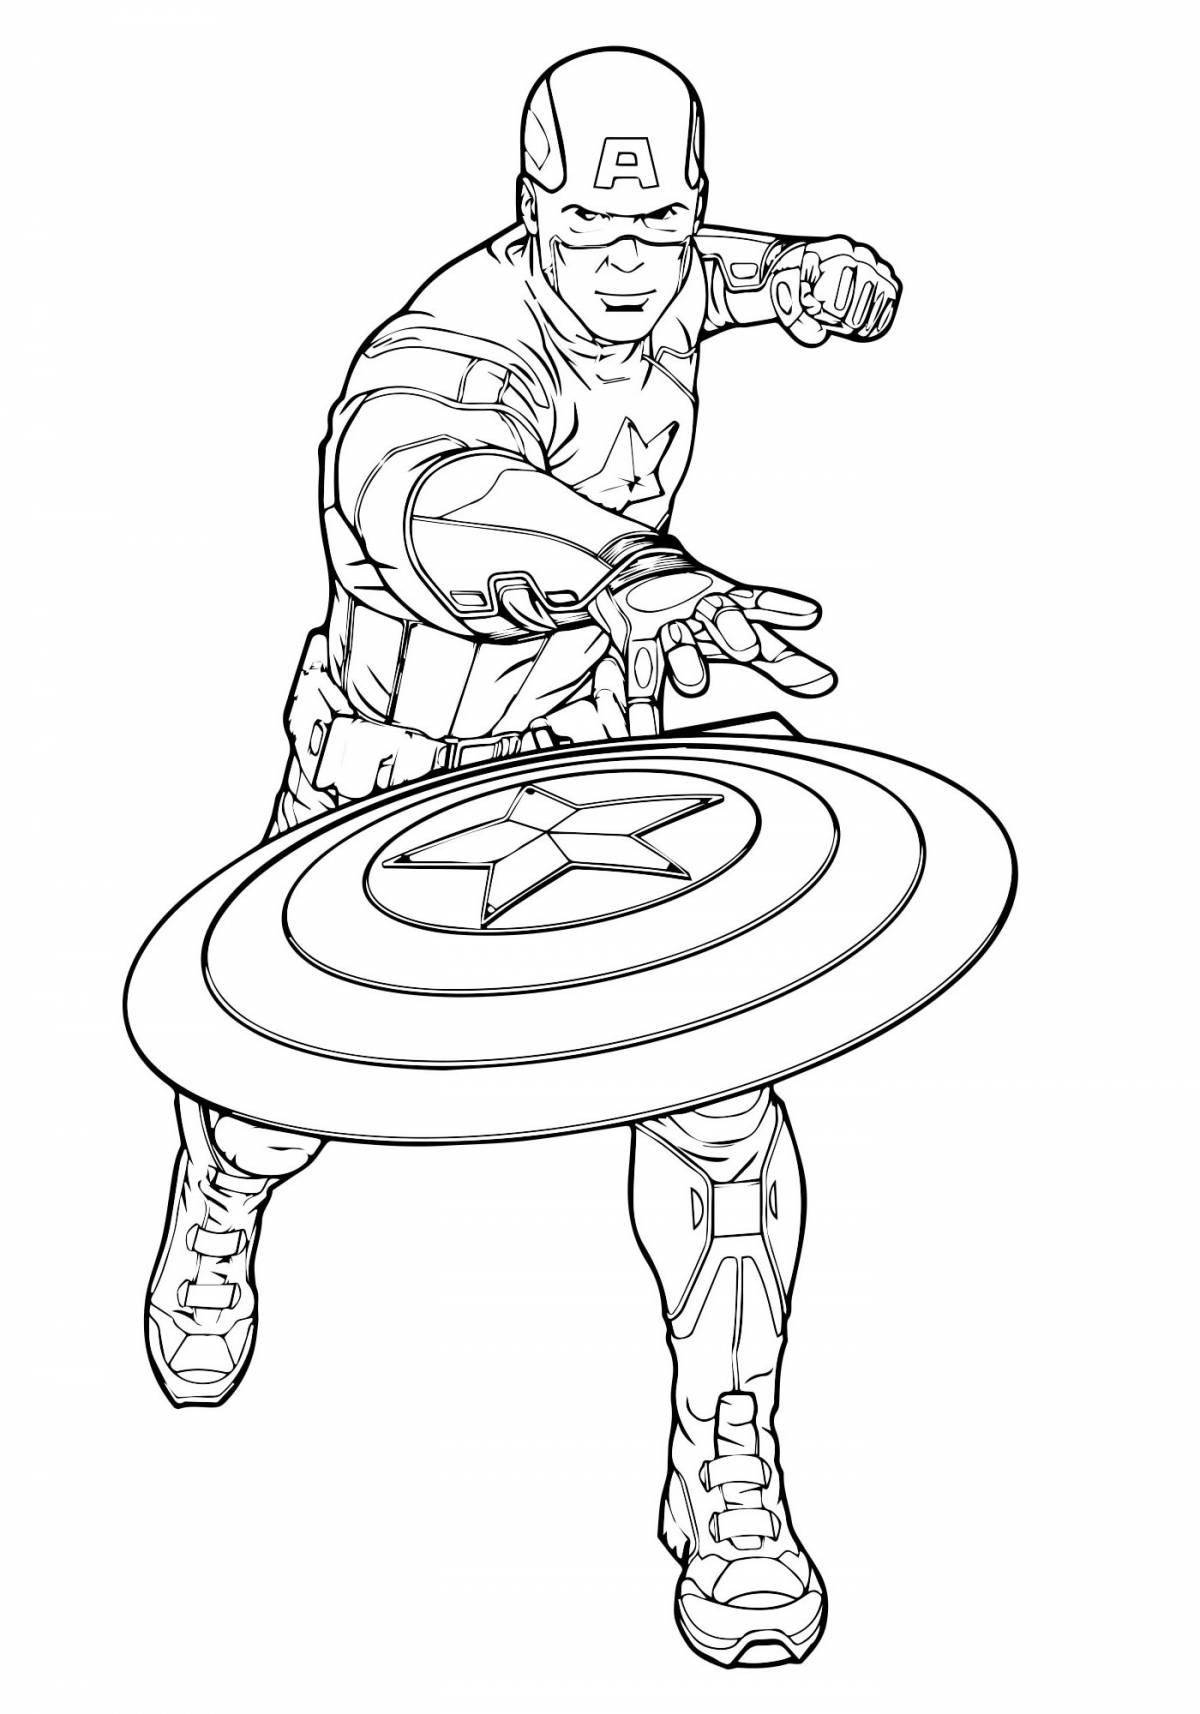 Playful captain america coloring page for kids